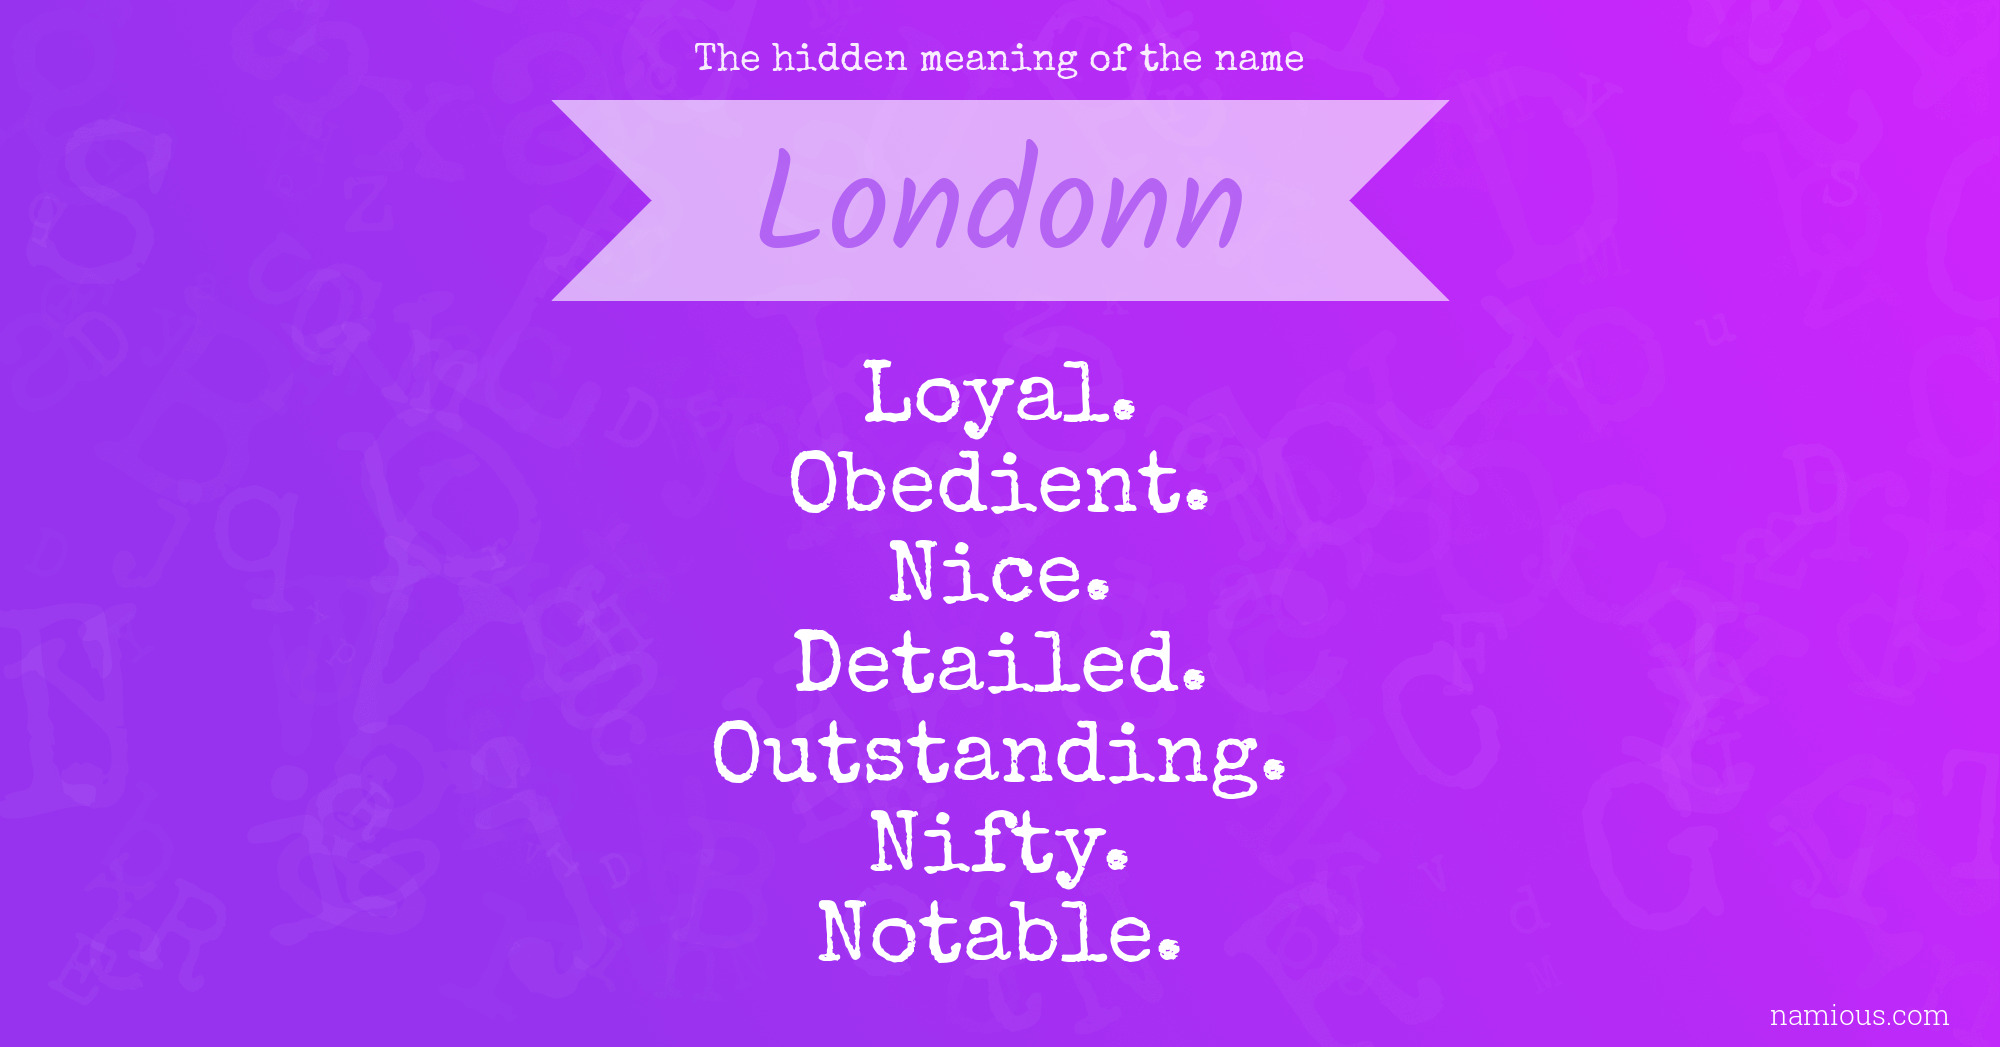 The hidden meaning of the name Londonn